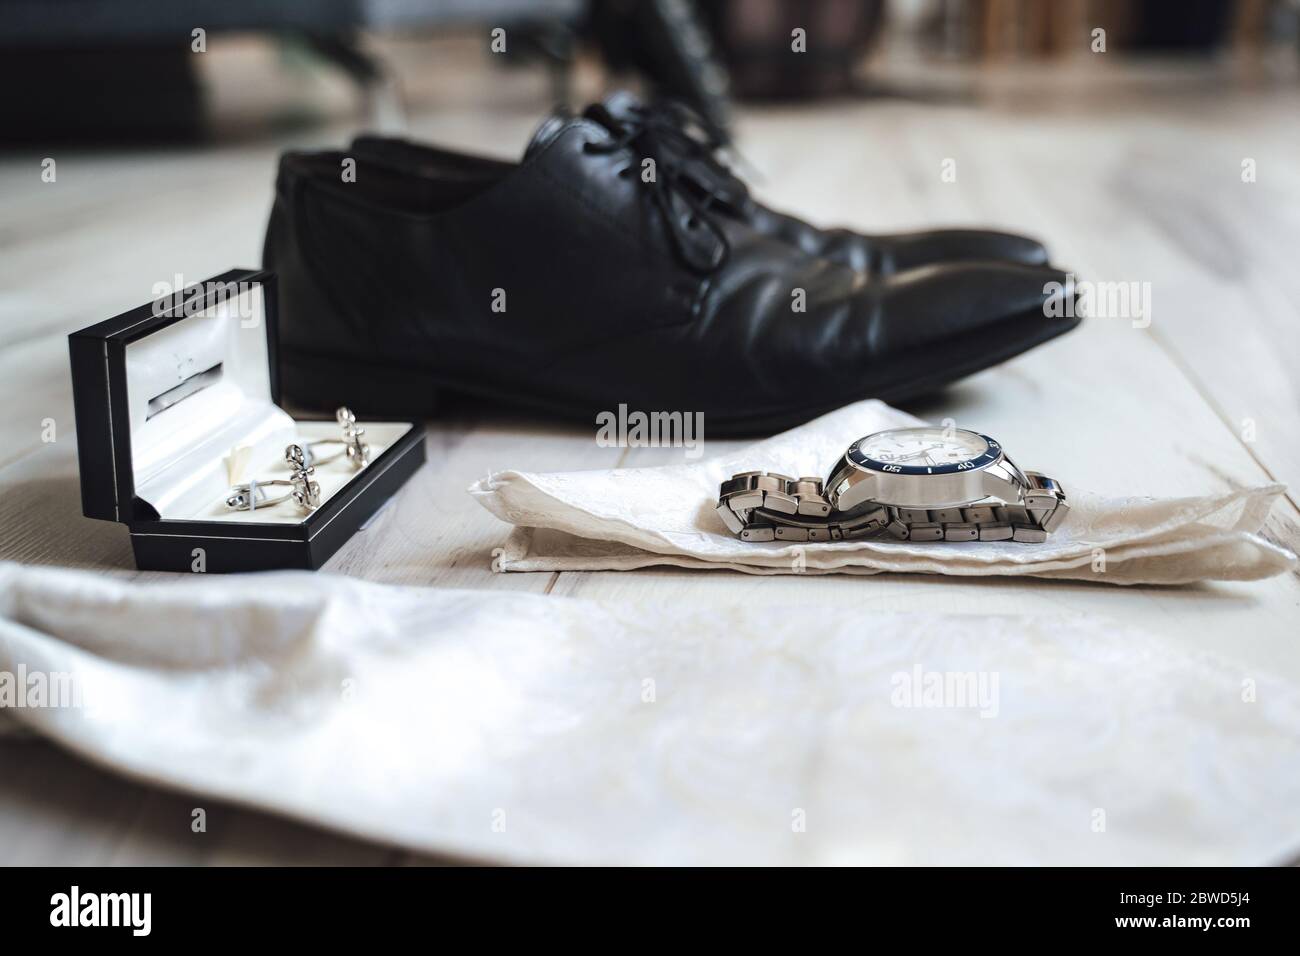 Close Up Of Modern Man Accessories Wedding Rings Black Bowtie Leather Shoes  Belt And Cufflinks Stock Photo - Download Image Now - iStock